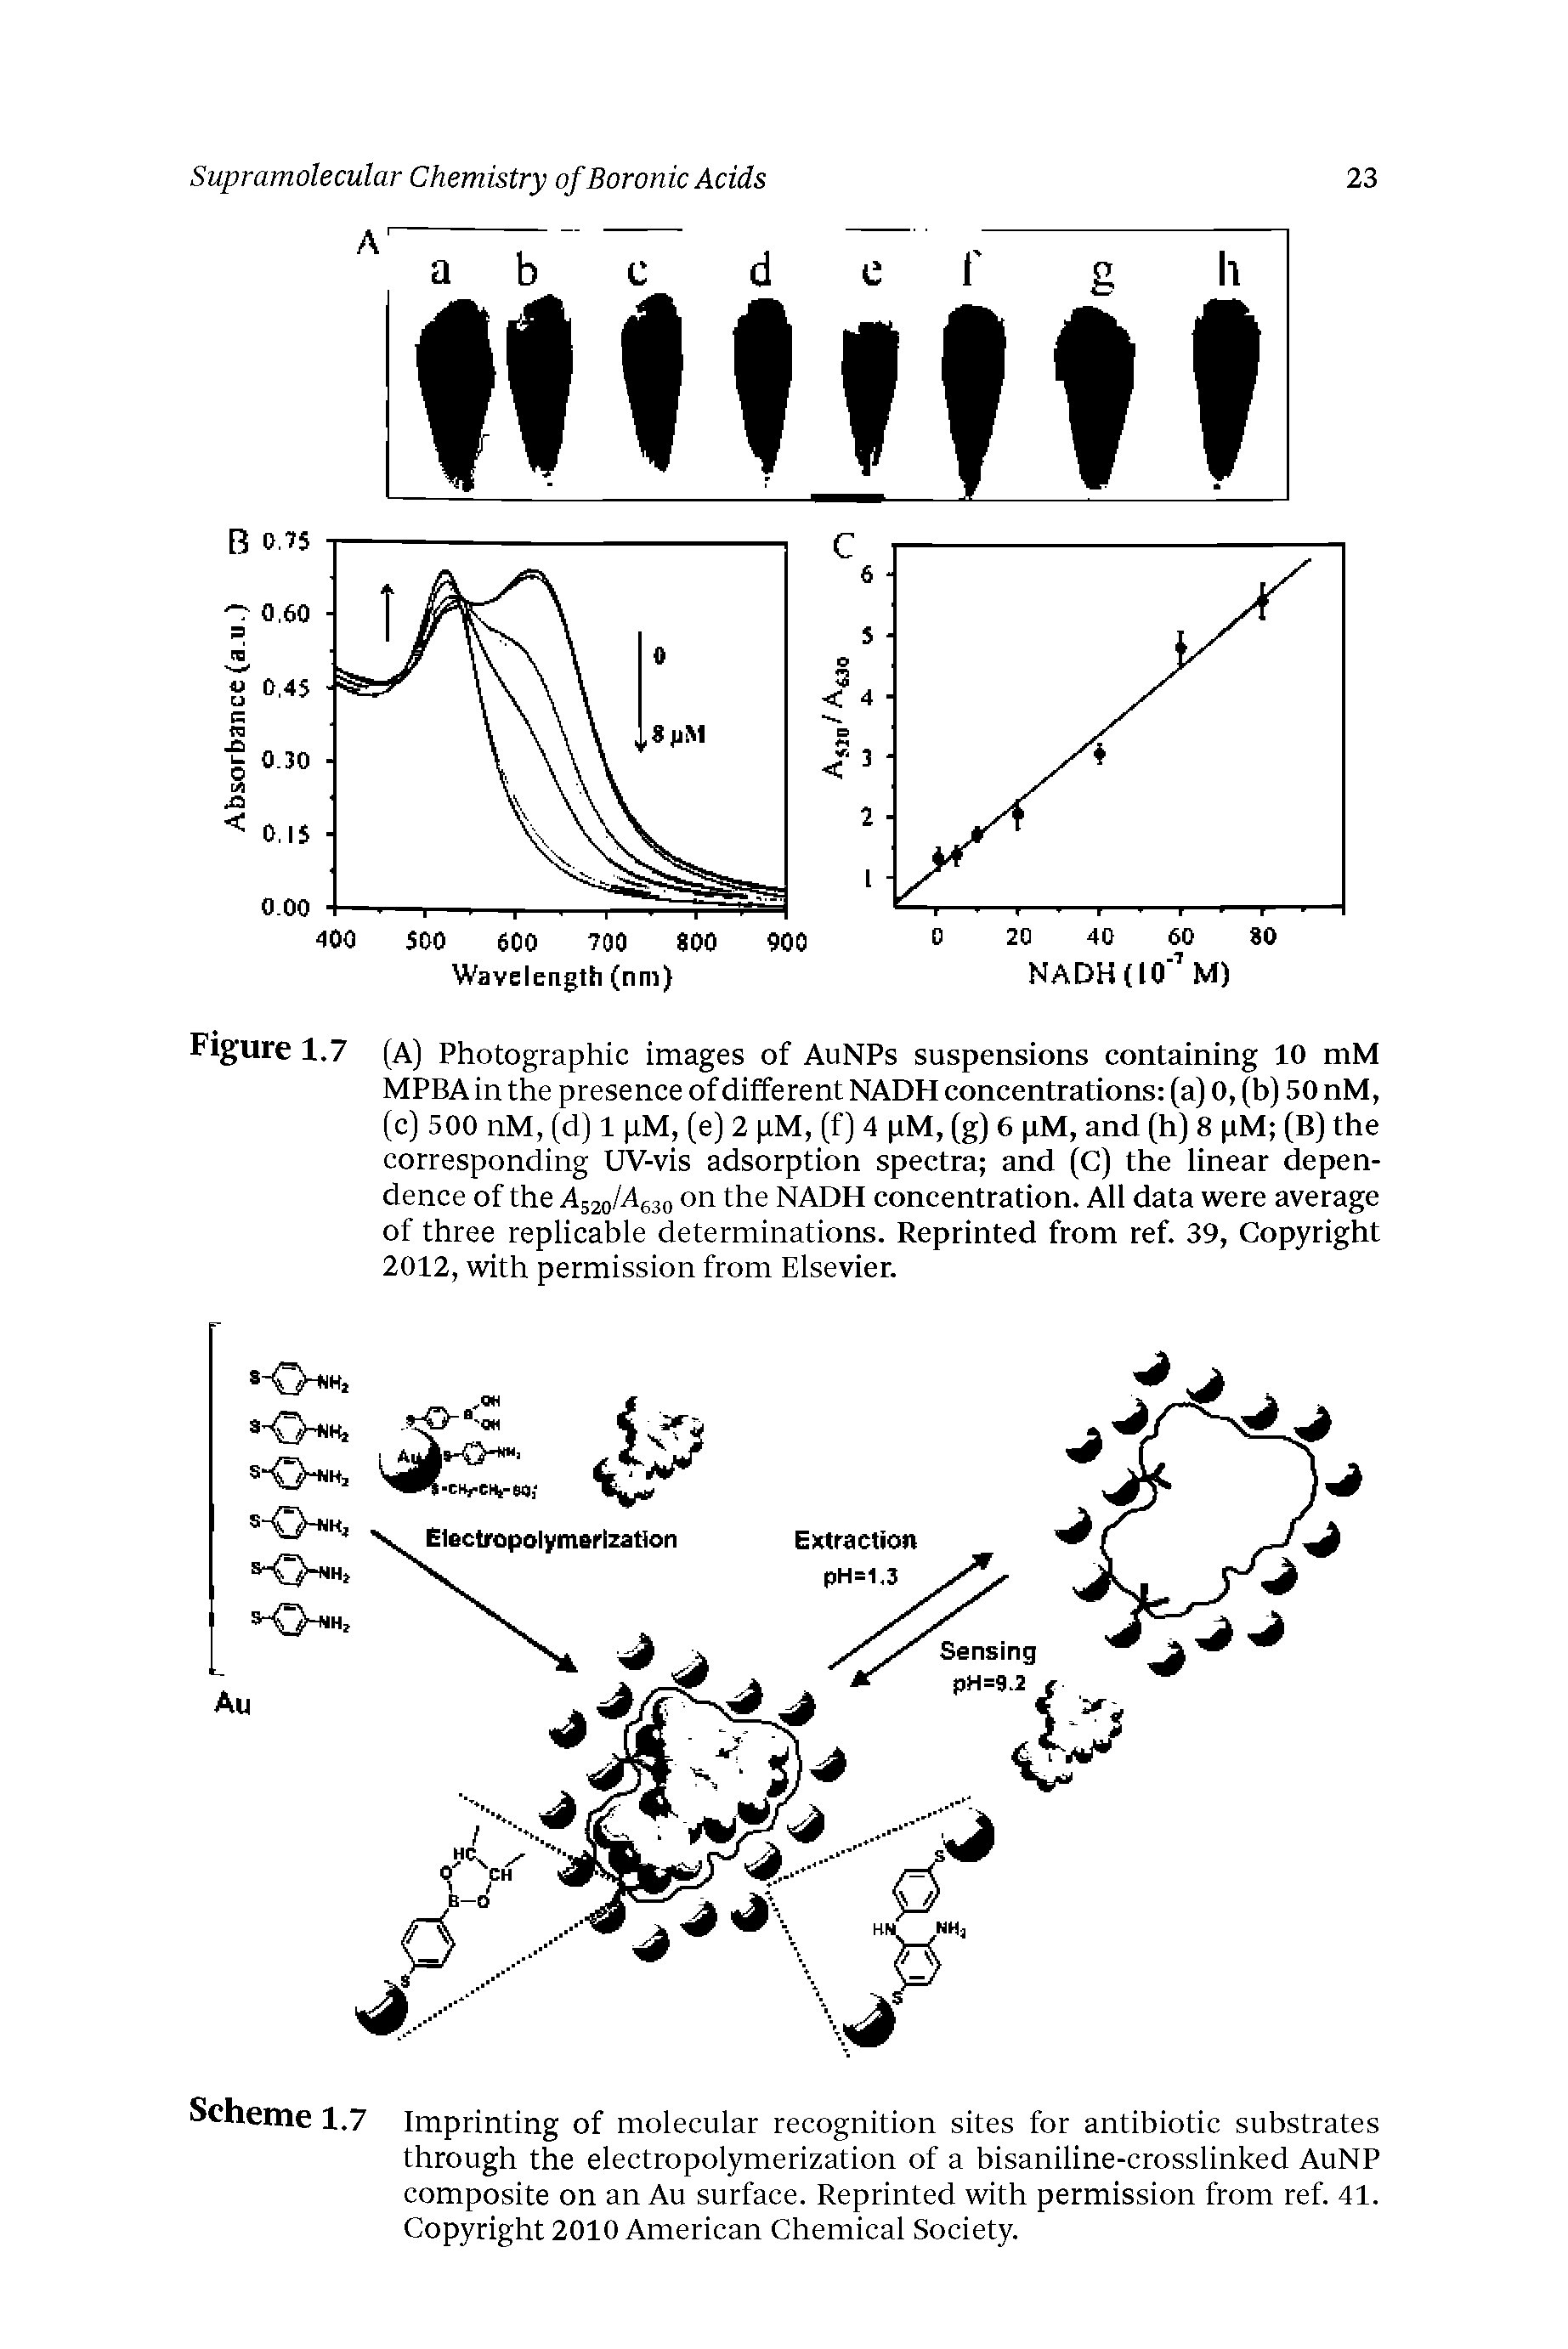 Scheme 1.7 Imprinting of molecular recognition sites for antibiotic substrates through the electropolymerization of a bisaniline-crosslinked AuNP composite on an Au surface. Reprinted with permission from ref. 41. Copyright 2010 American Chemical Society.